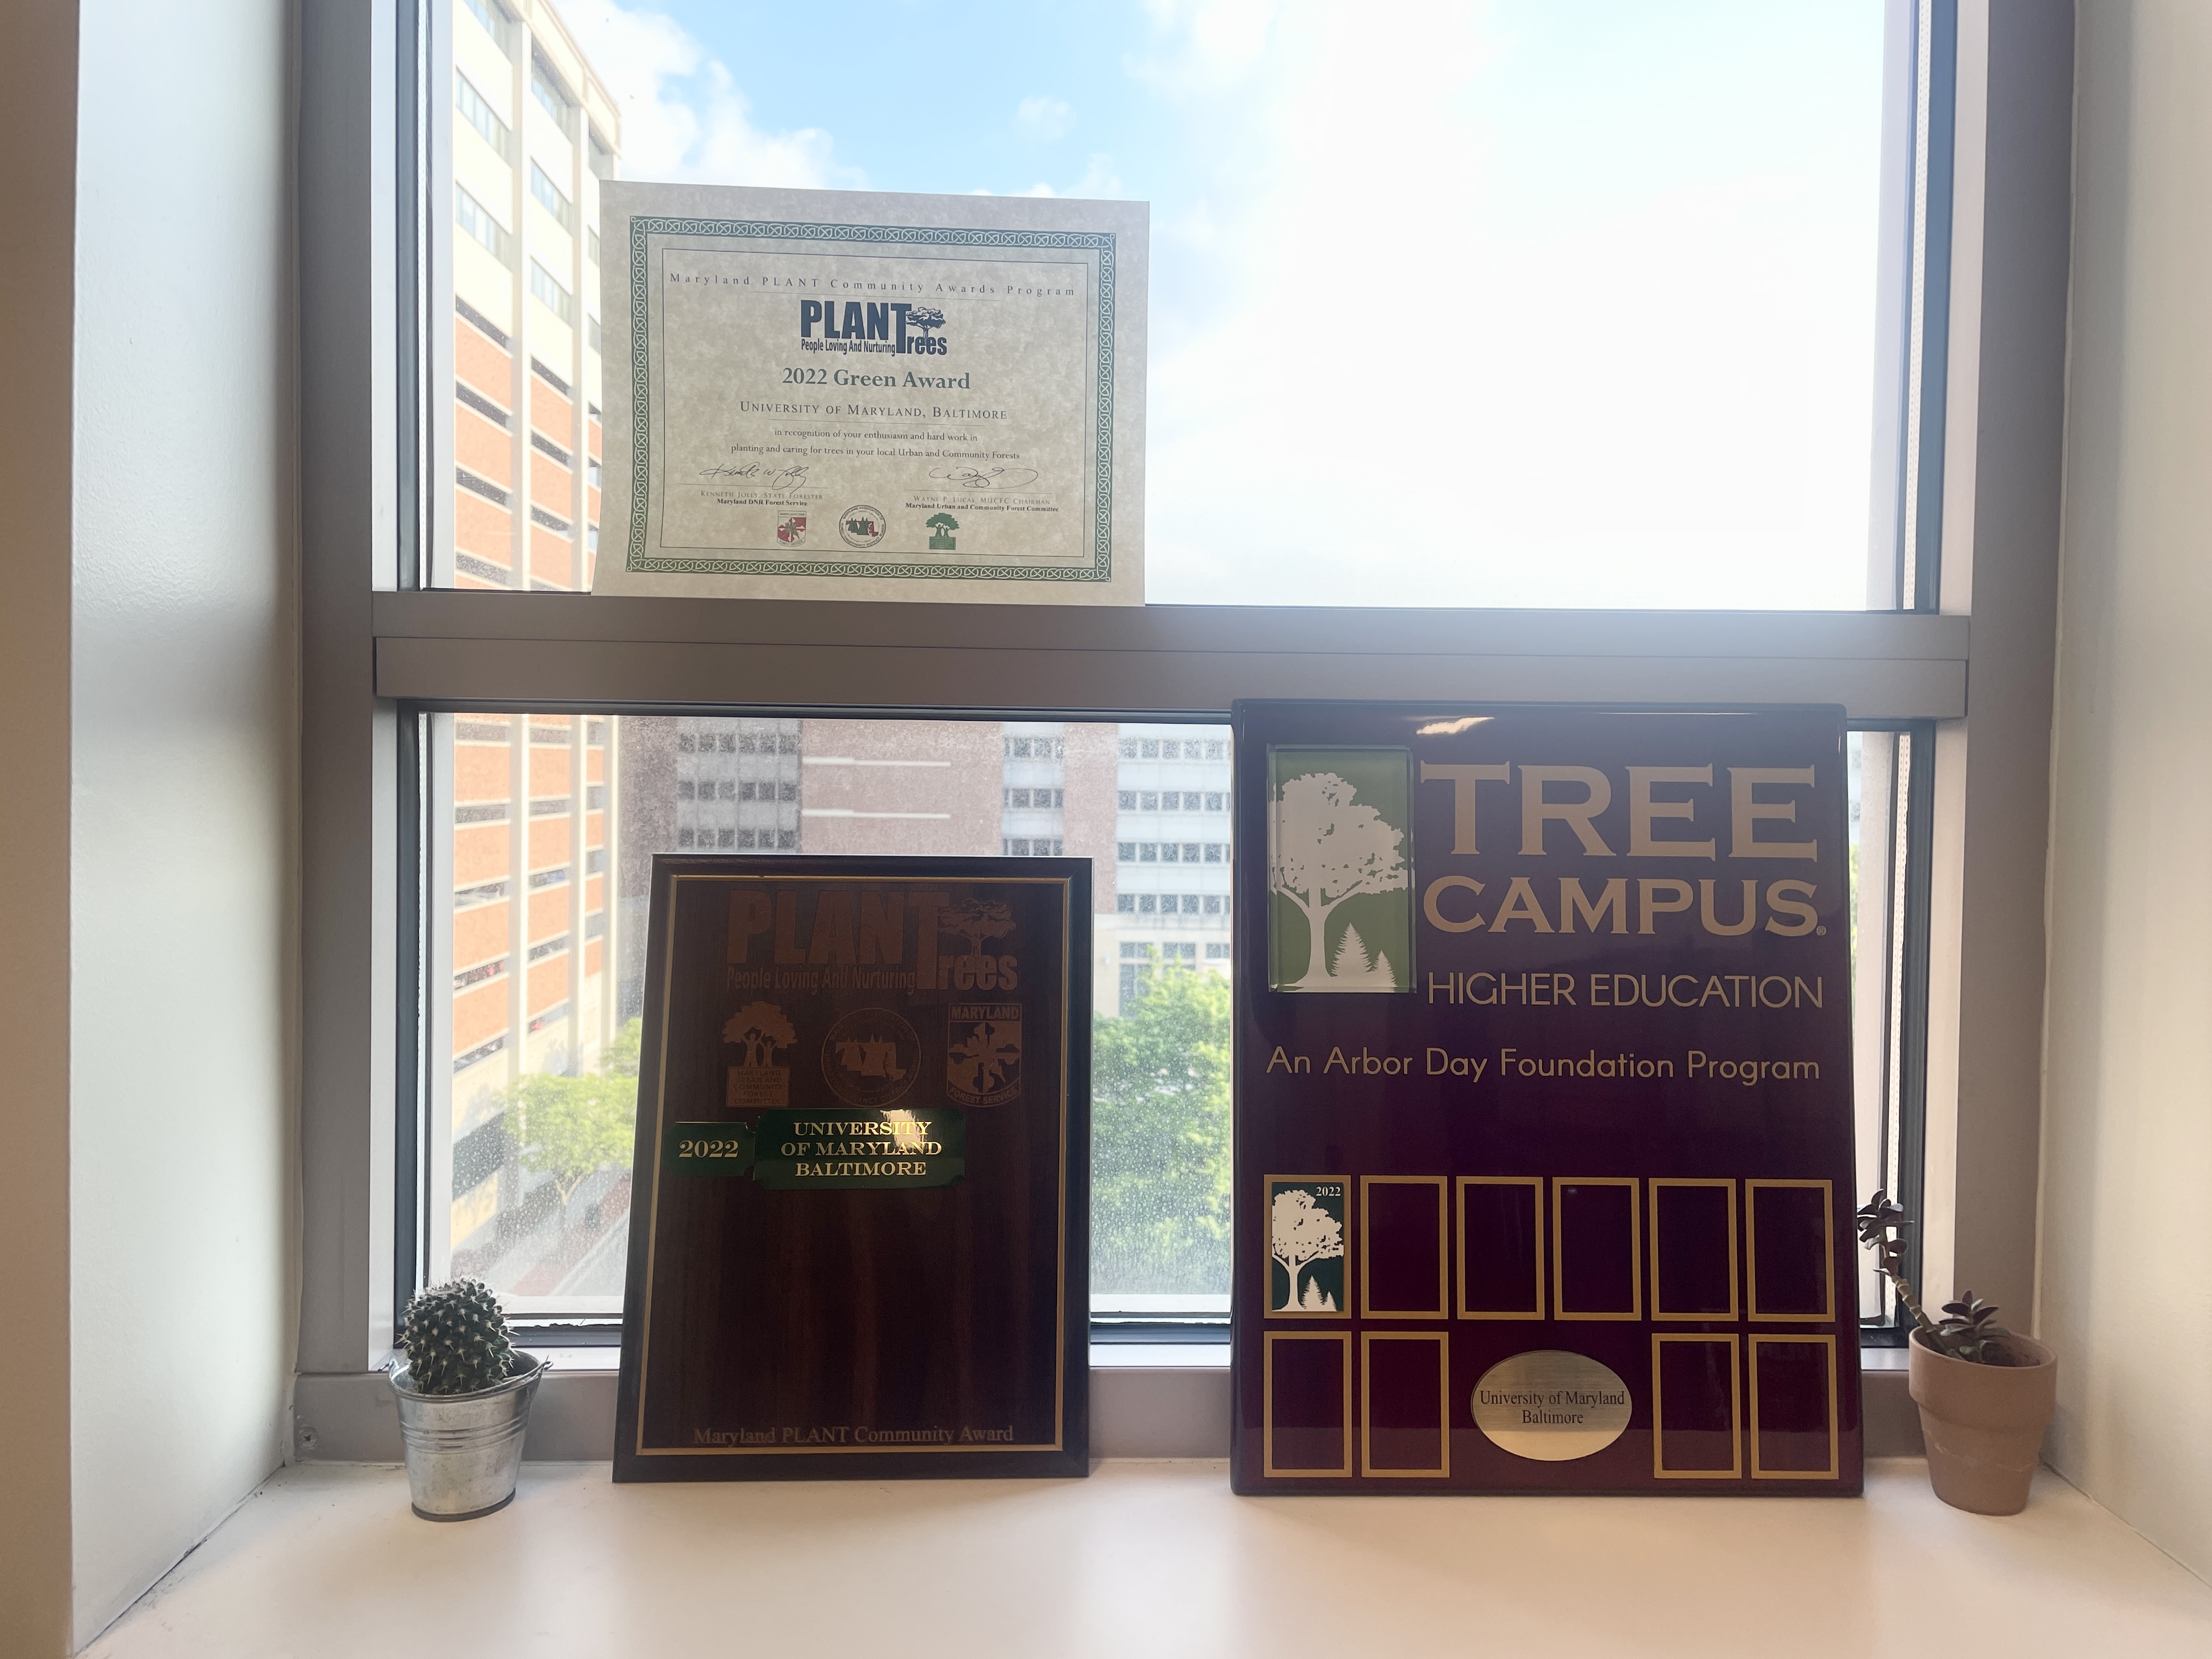 Image depicts three award plaques resting against a sunny window. There are two 2022 Tree Campus Higher Education recognitions and one 2022 Green PLANT Award.